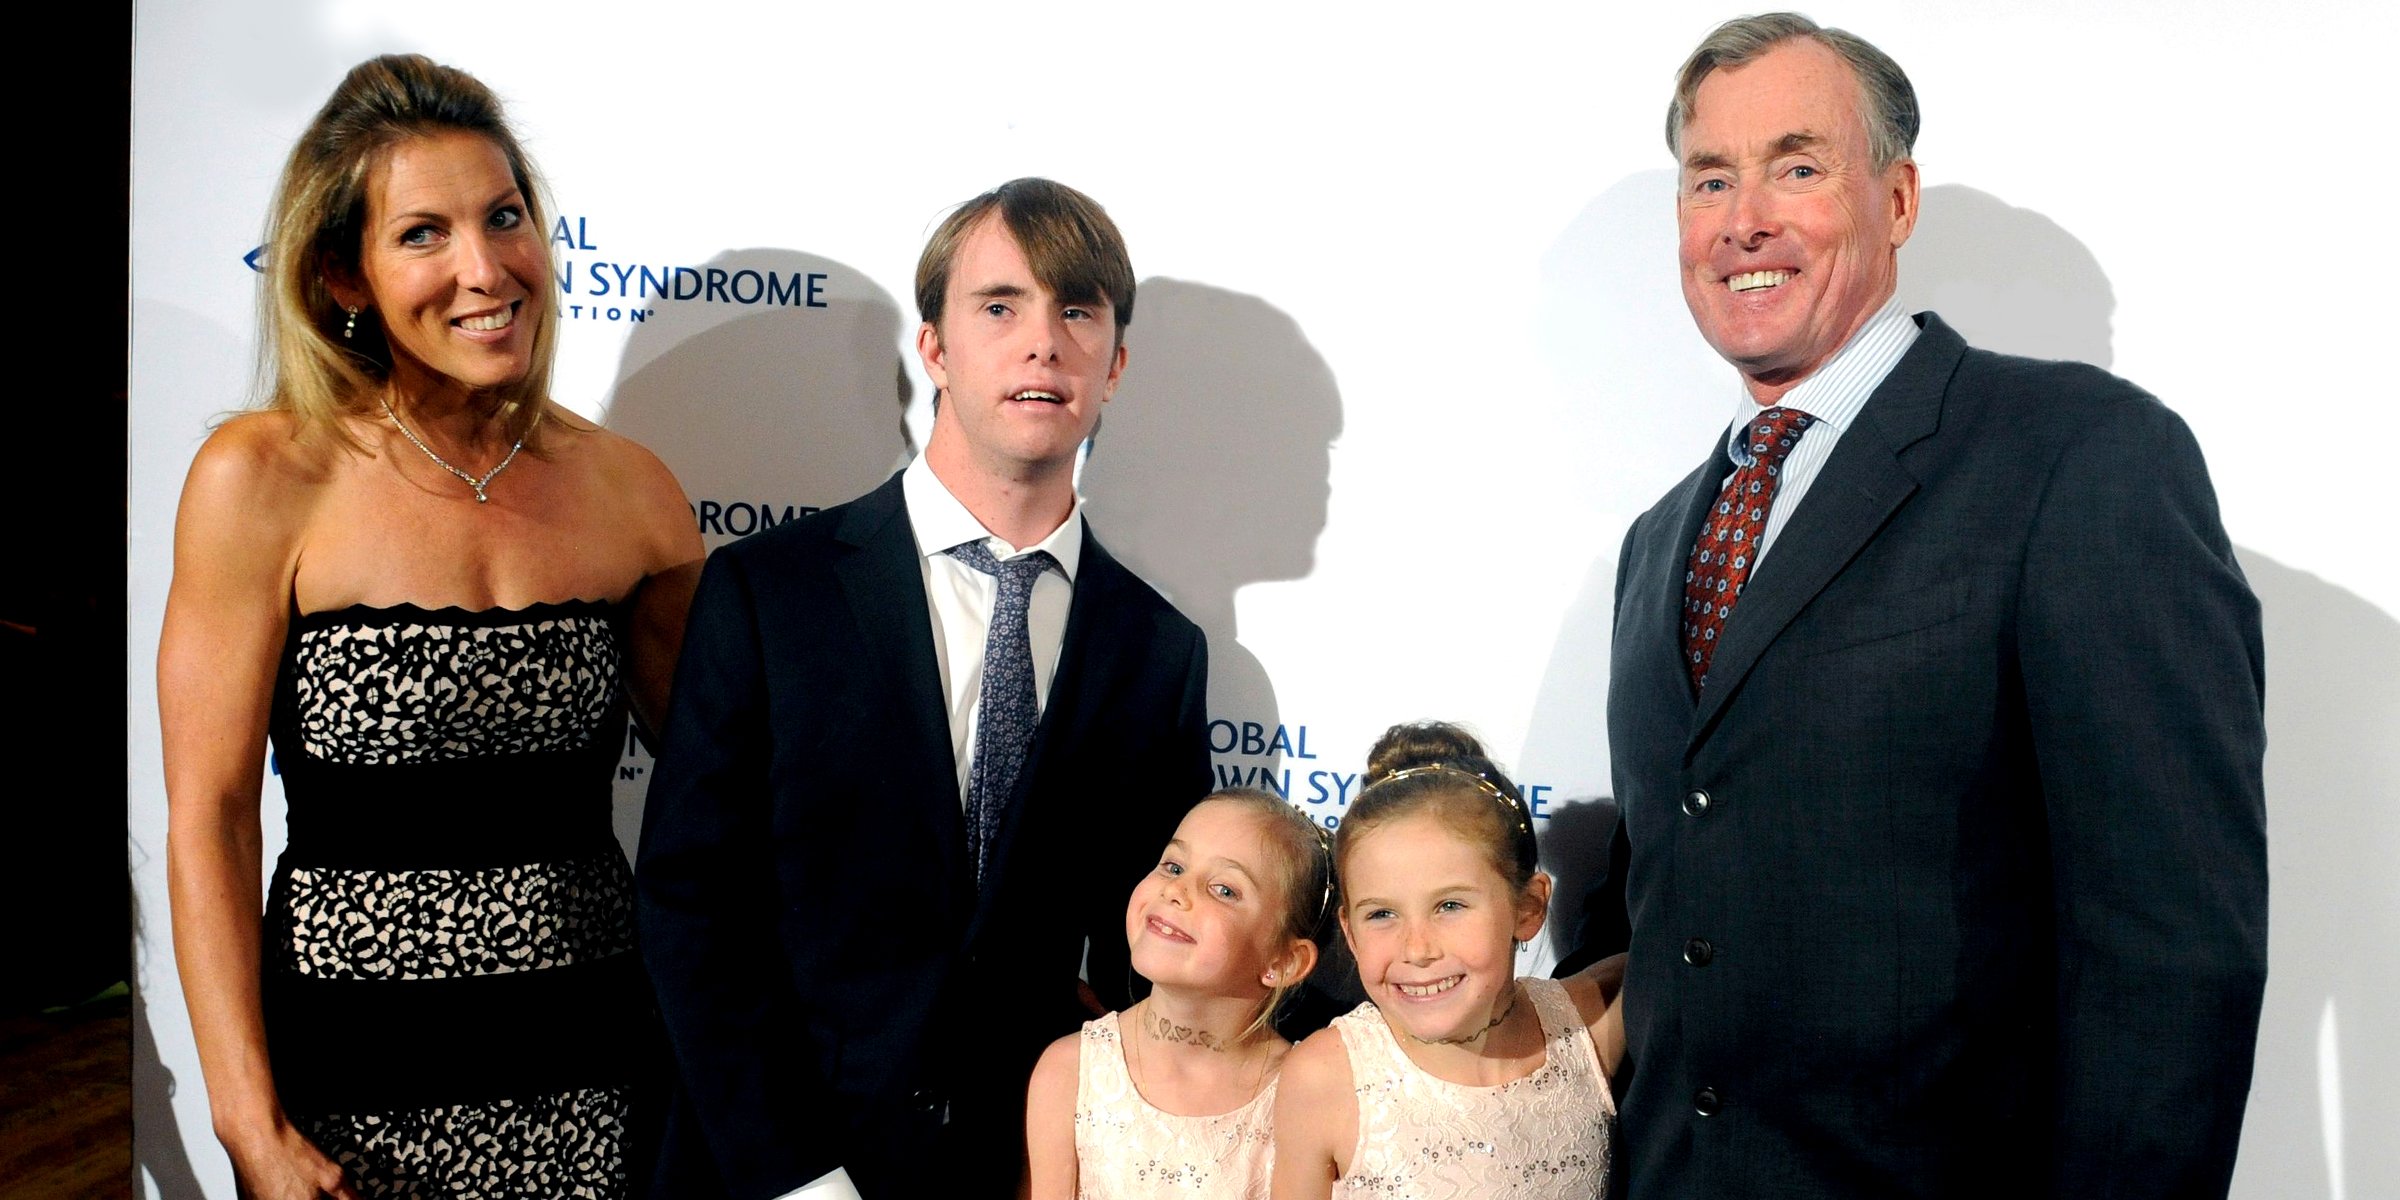 John C. McGinley with his wife Nichole Kessler, son Max, and daughters Kate and Billie, 2016 I Source: Getty Images